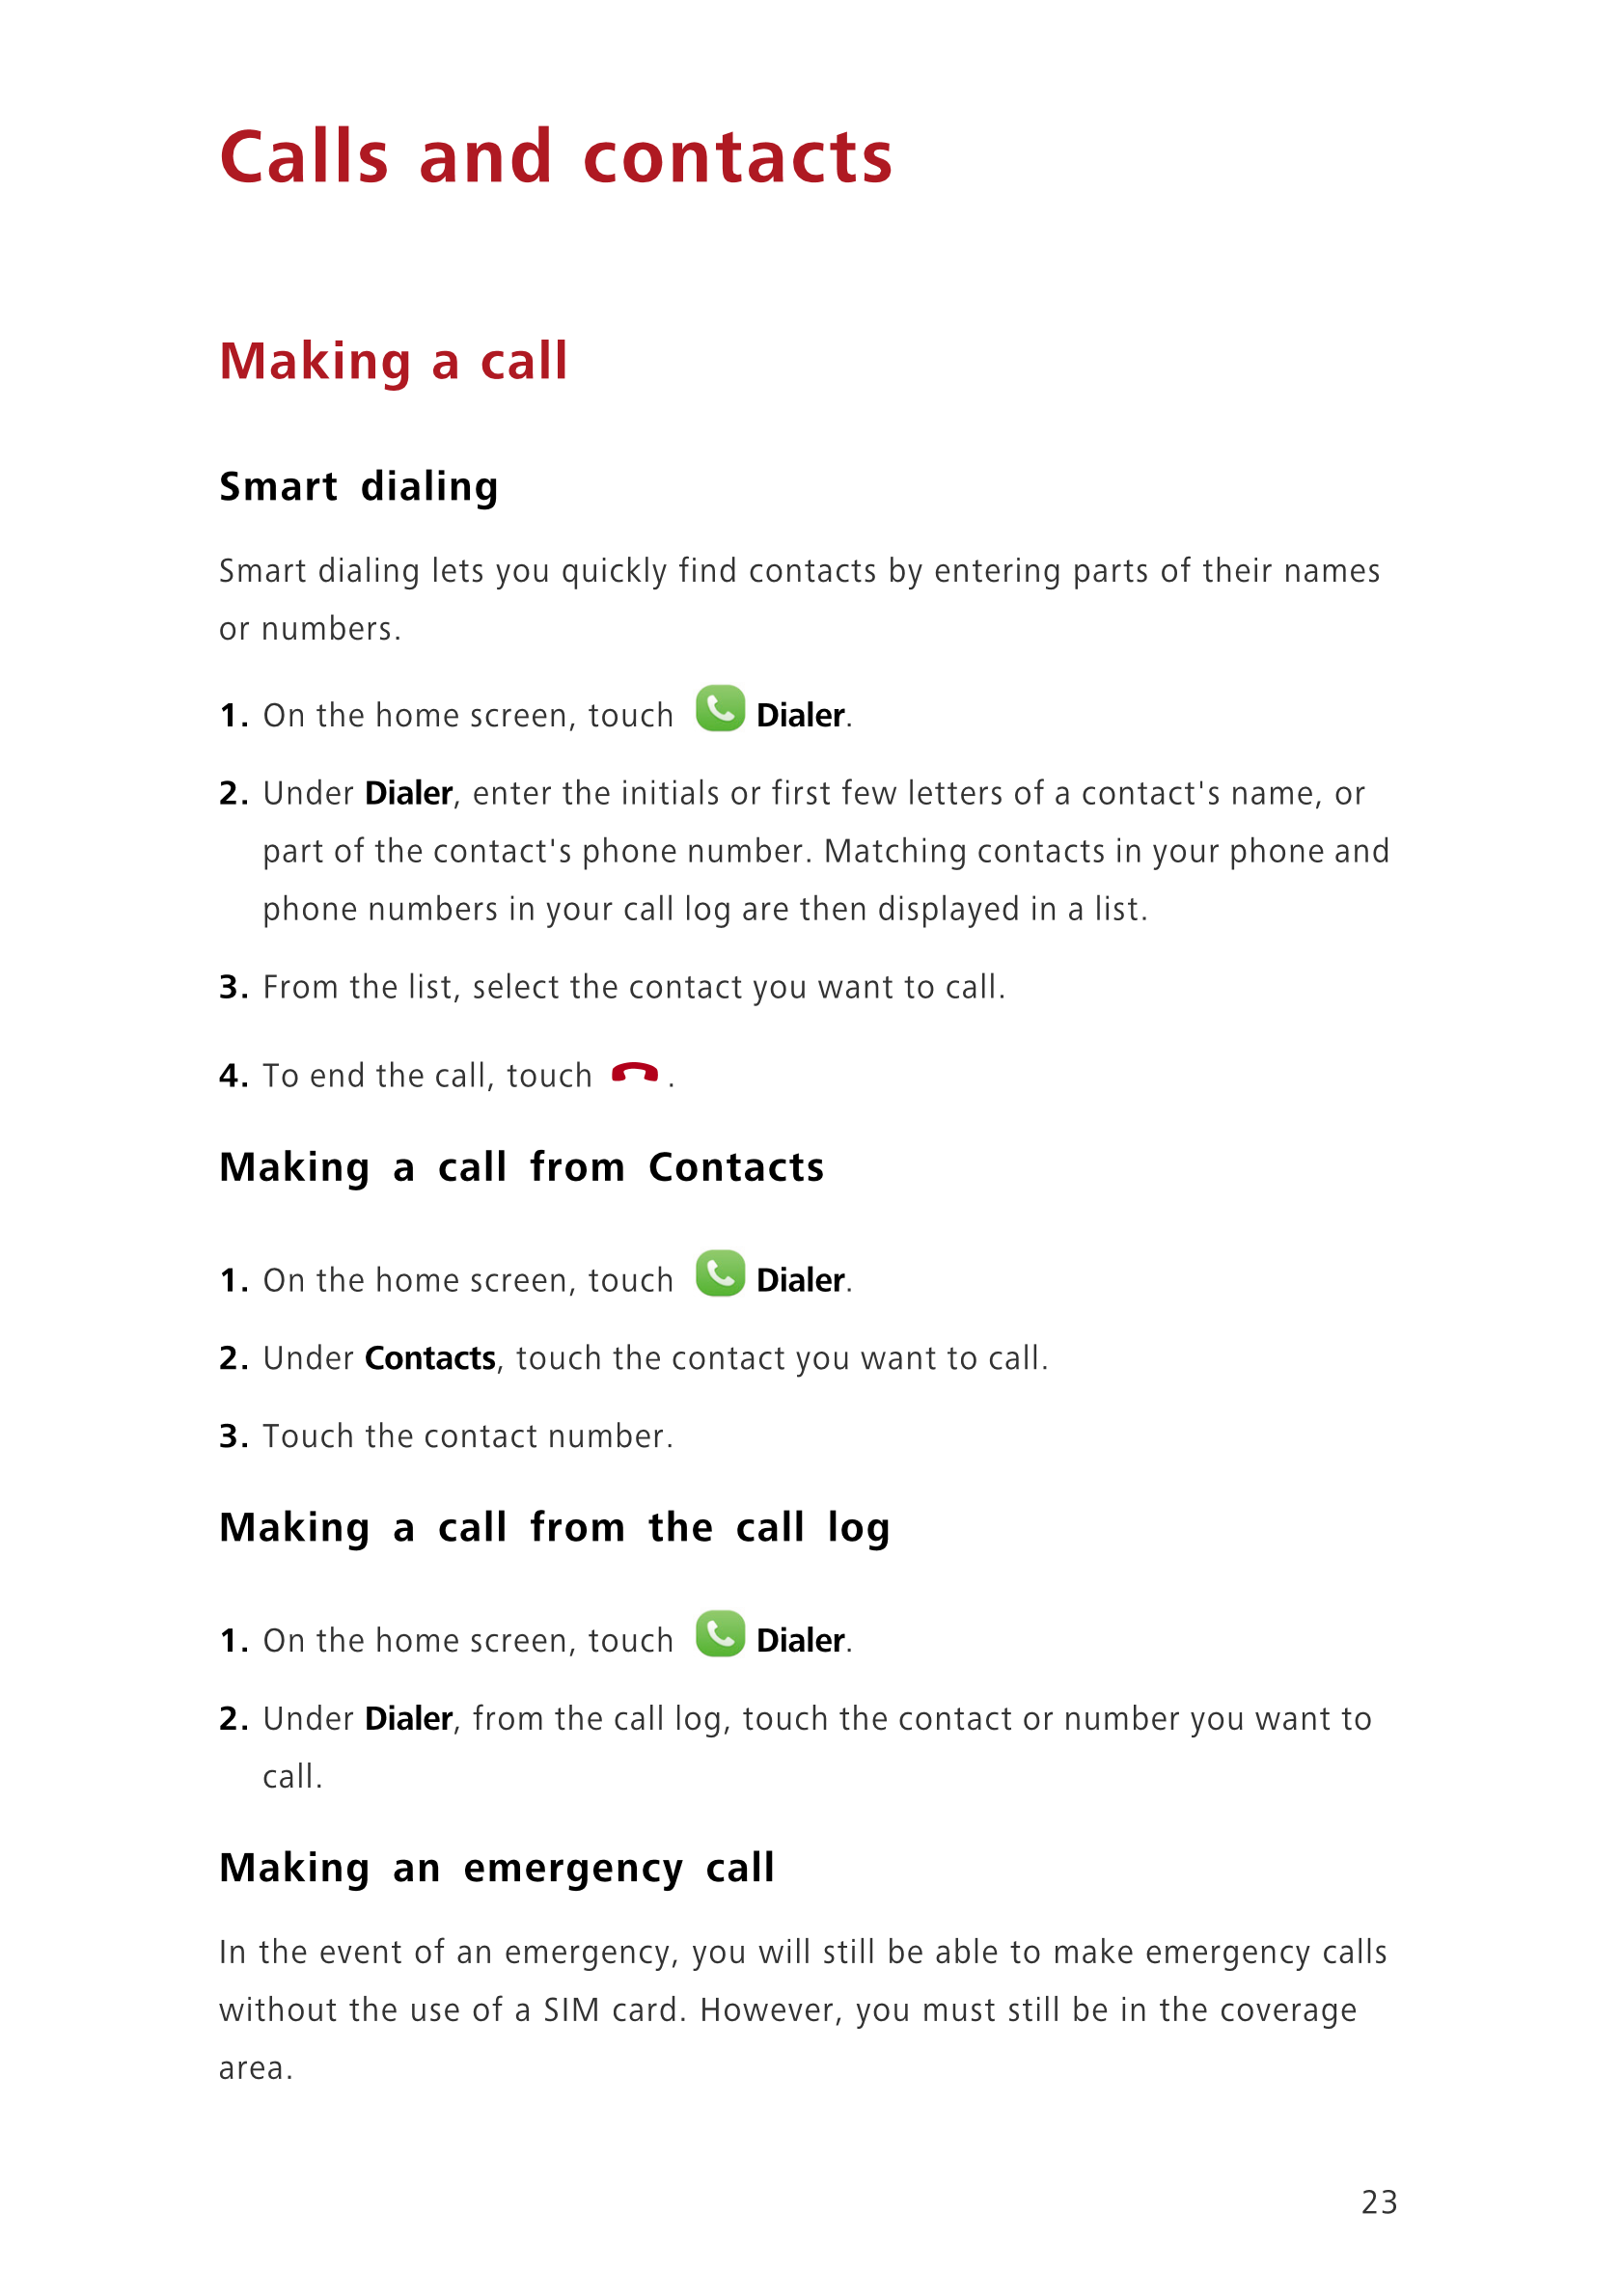 Calls and contacts
Making a call
Smart dialing
Smart dialing lets you quickly find contacts by entering parts of their names 
or